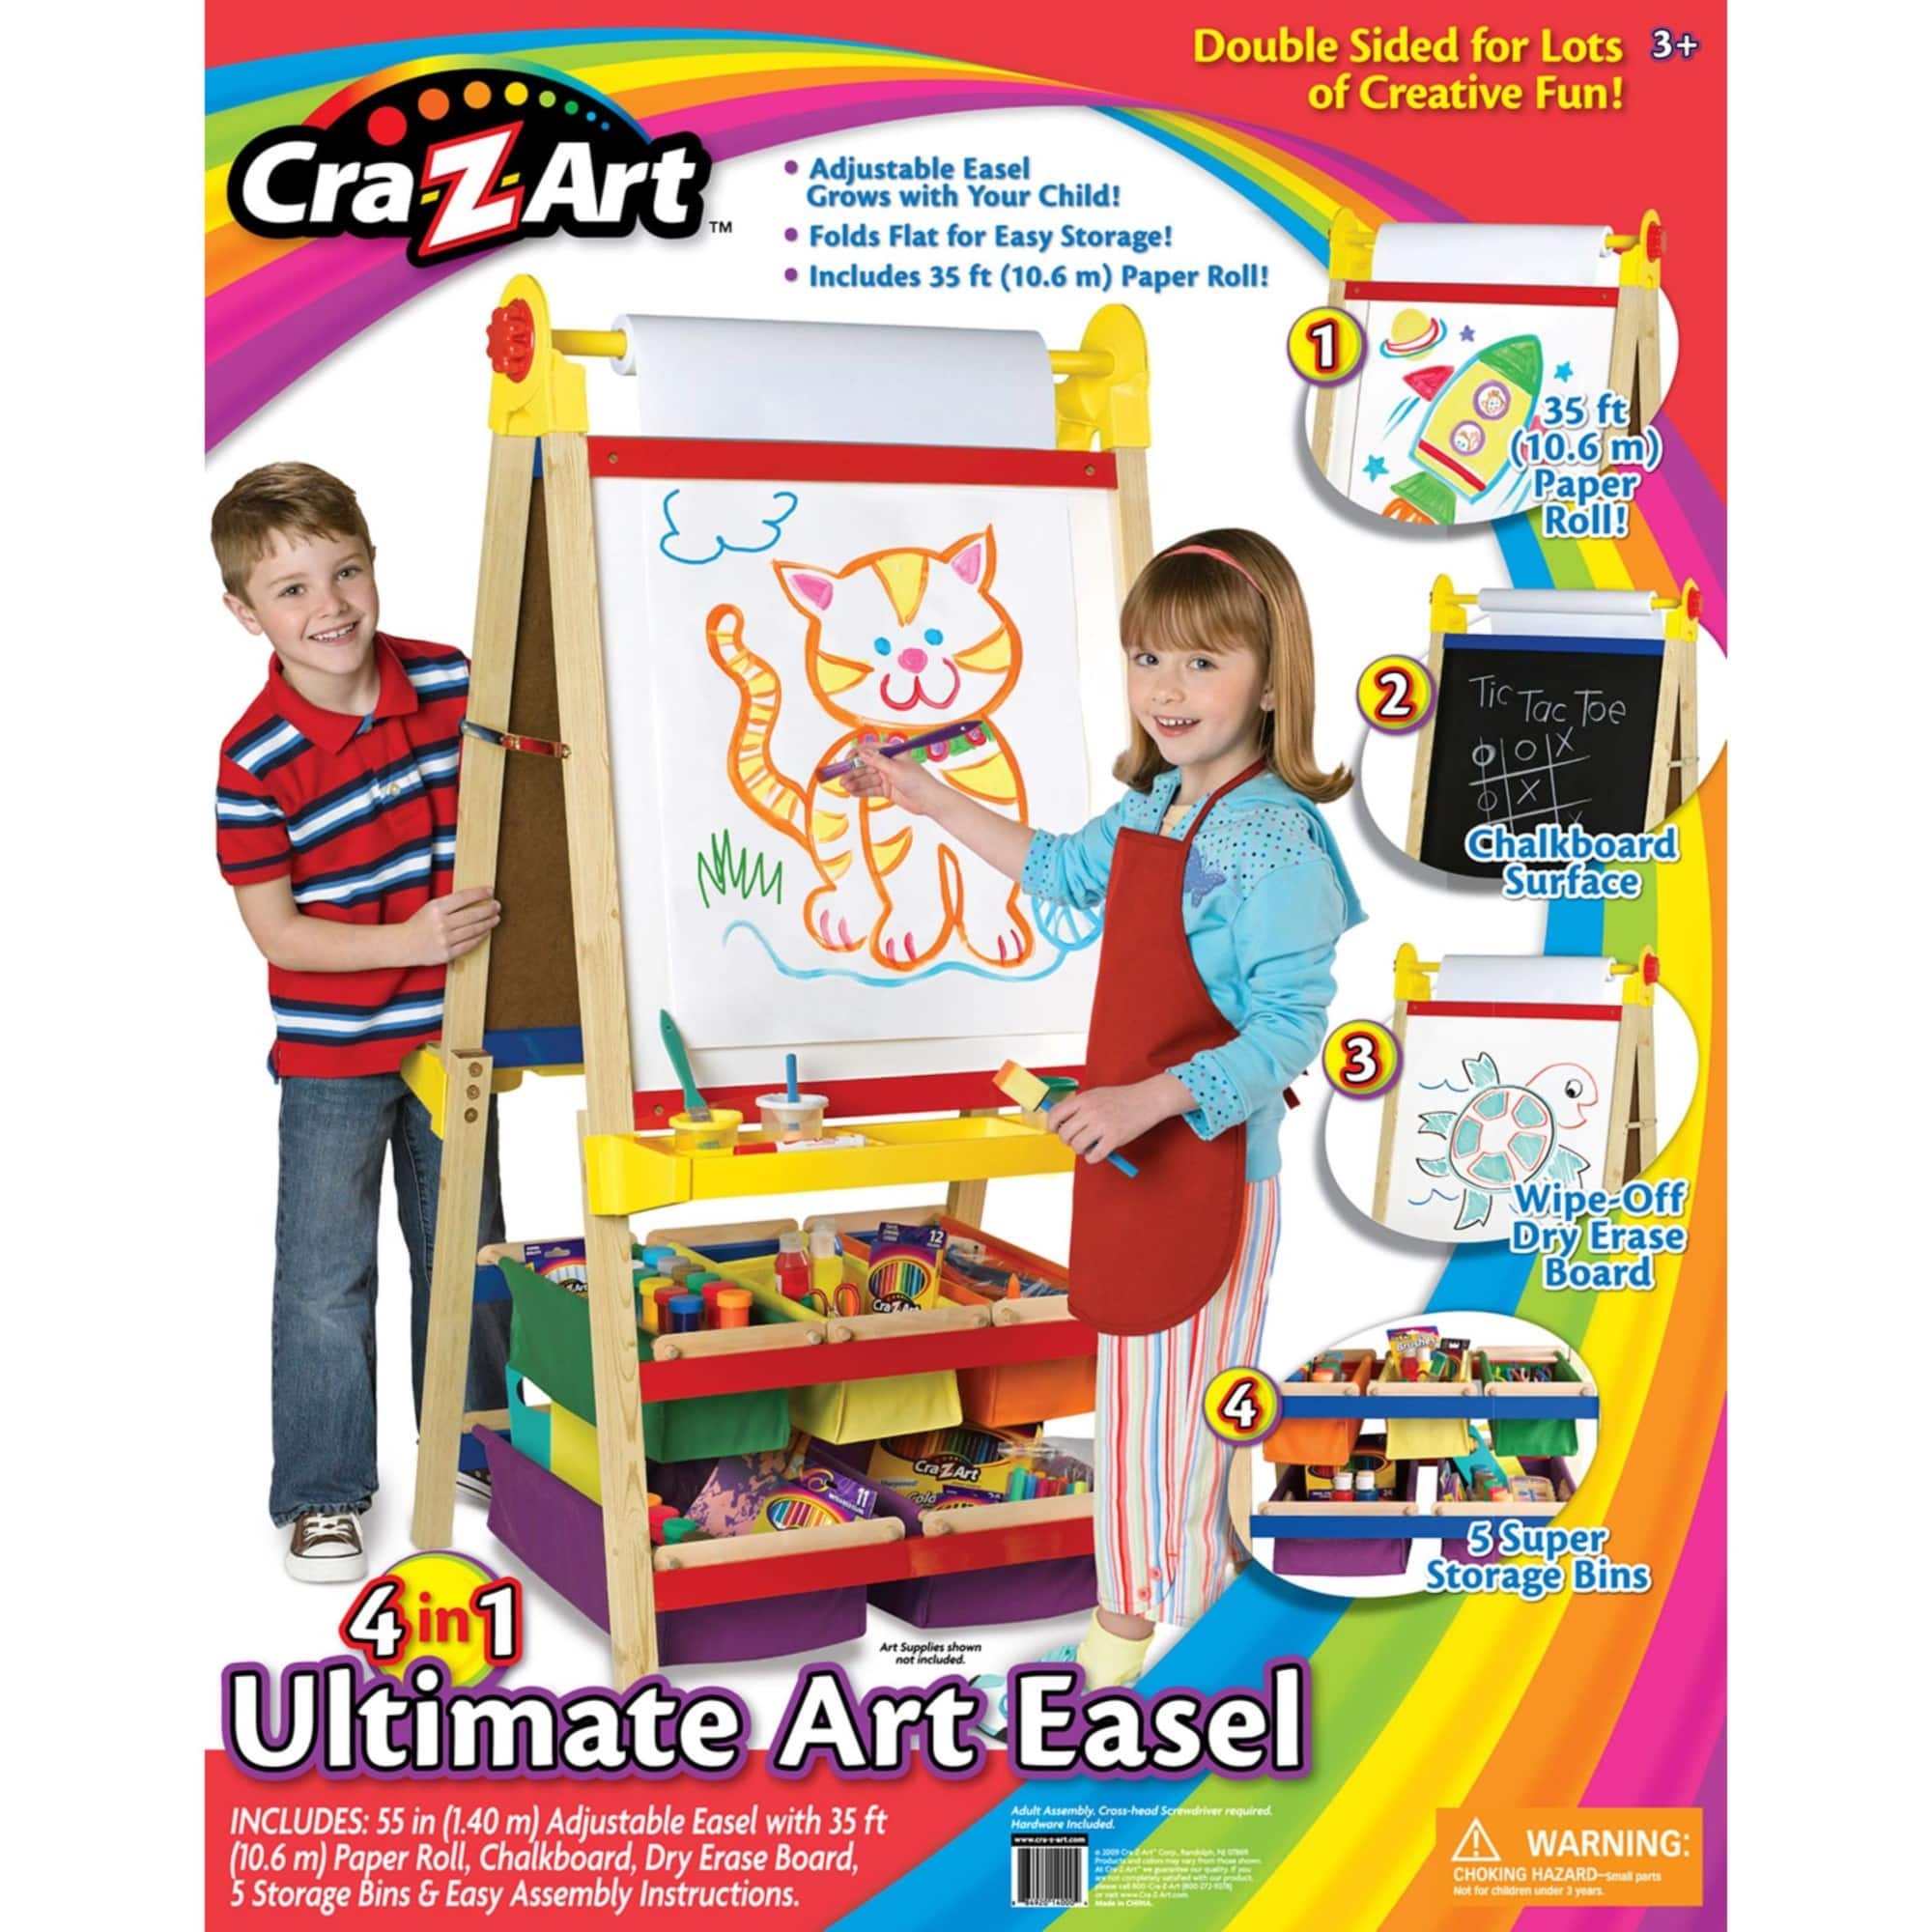  Easel for Kids - The Ultimate Art Station for Endless